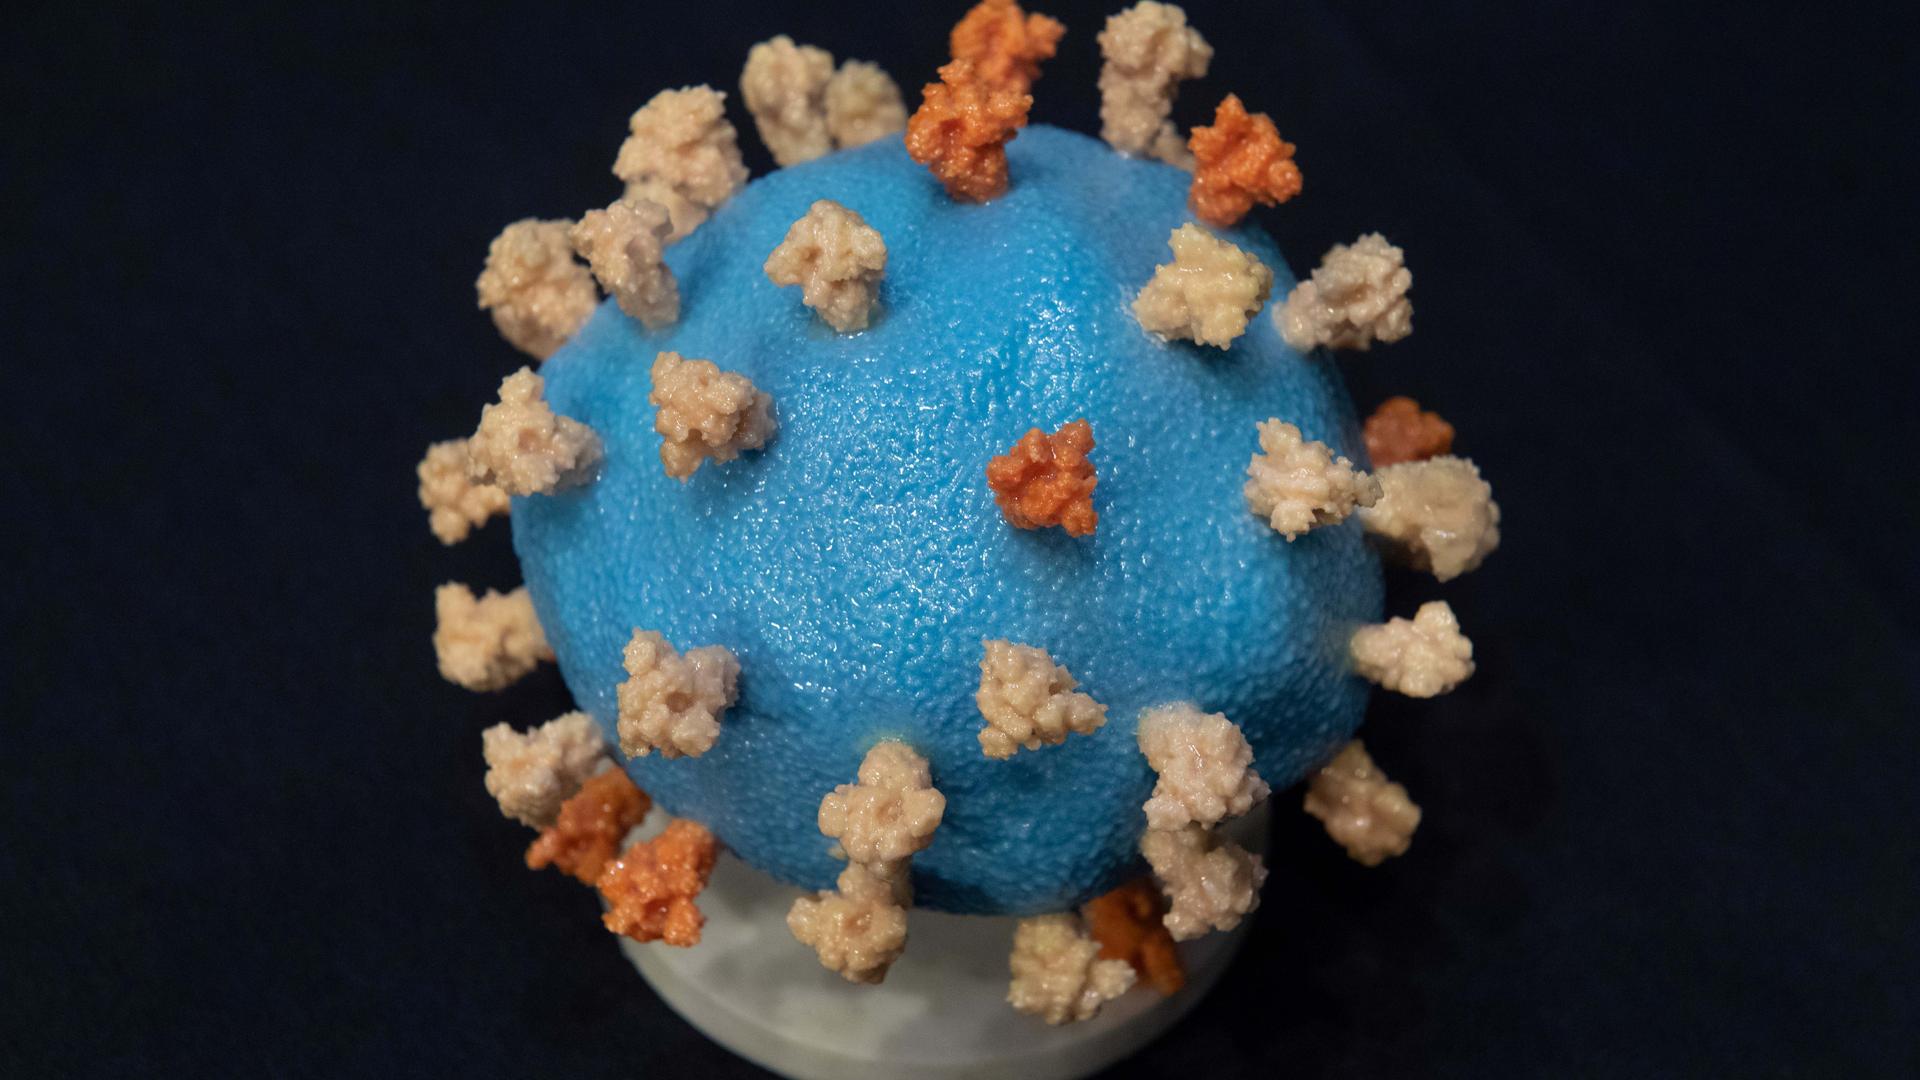 A circular, close-up model of the SARS-CoV-2, known as the novel coronavirus, modeled in blue, orange and white.